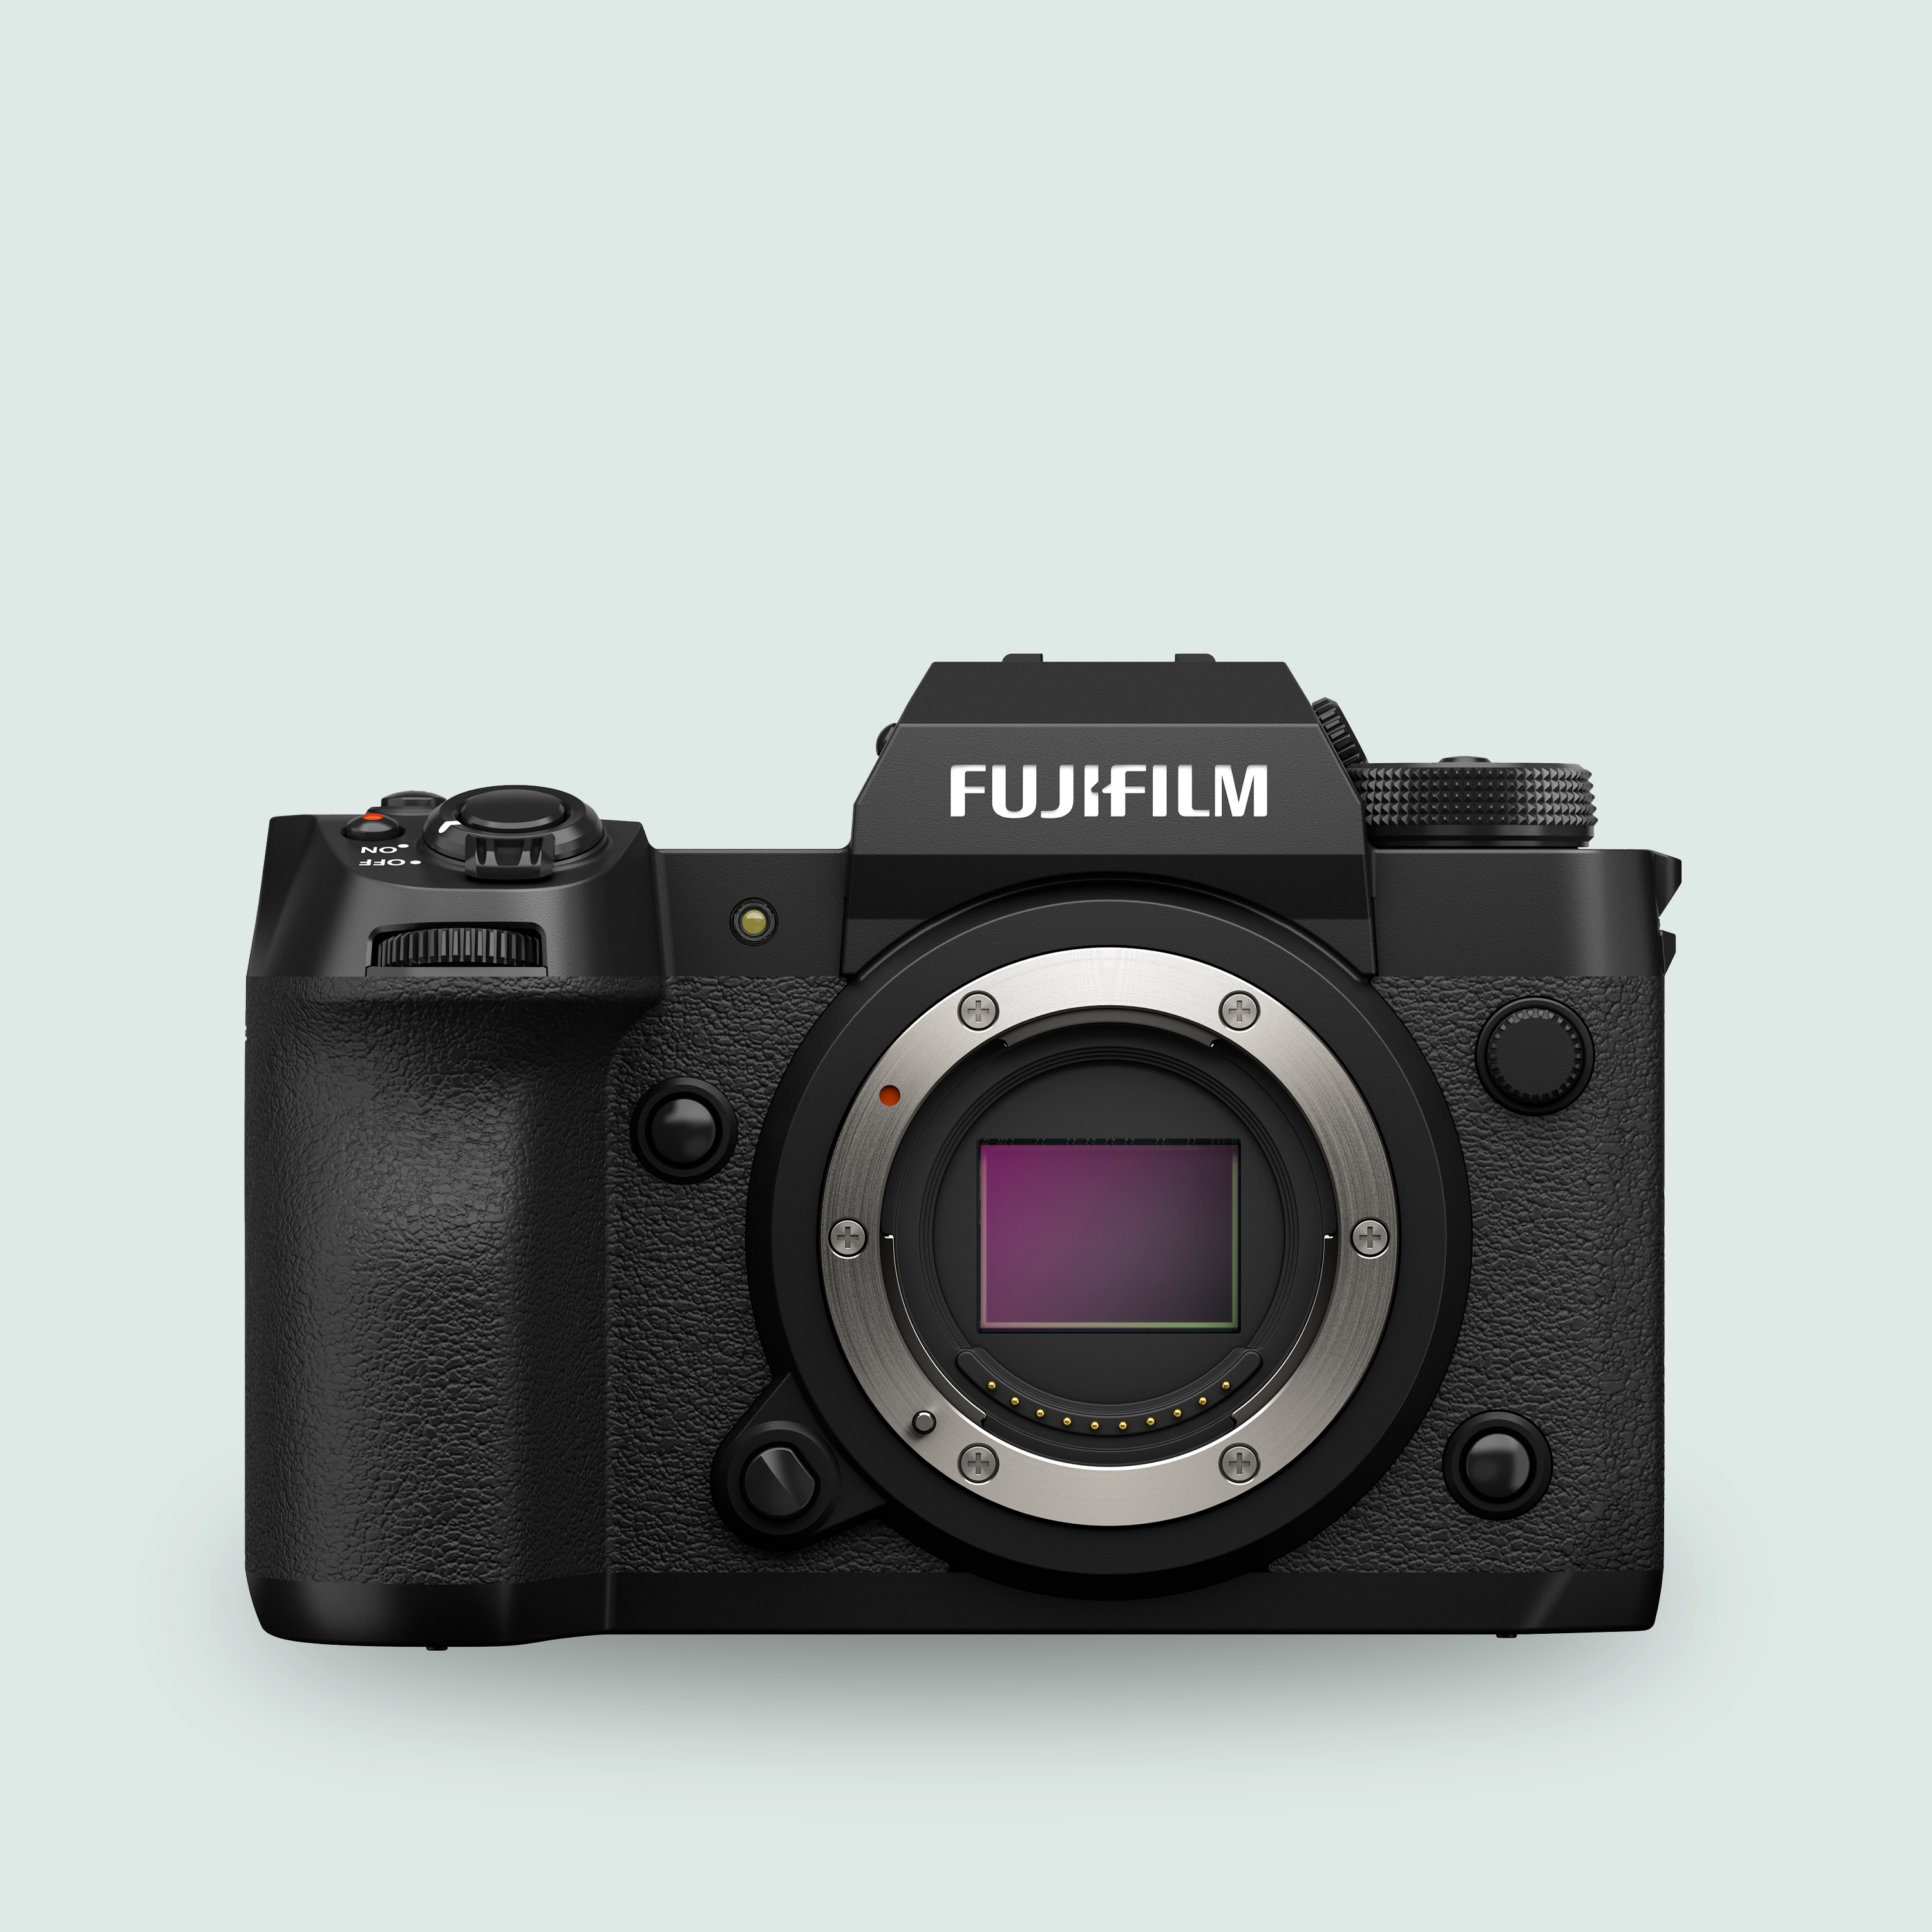 Fujifilm X-T30 II Review - 26.1MP for £769 body only - Amateur